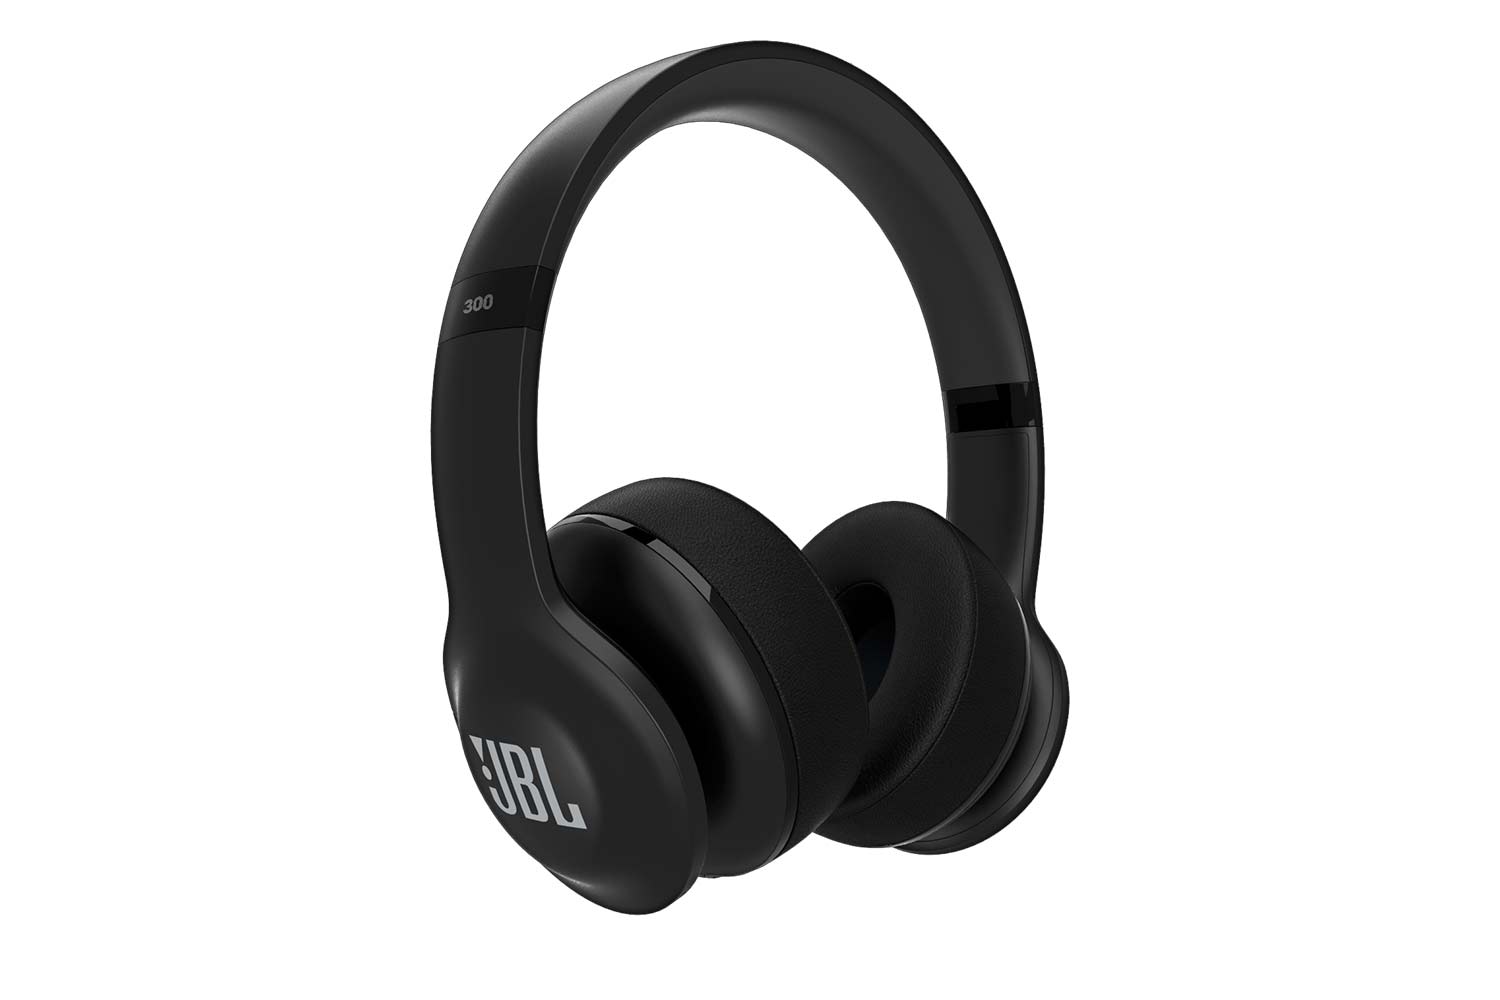 jbl new headphones ifa everest reflect grip noise cancelling bluetooth large 300  oe bt black frontright